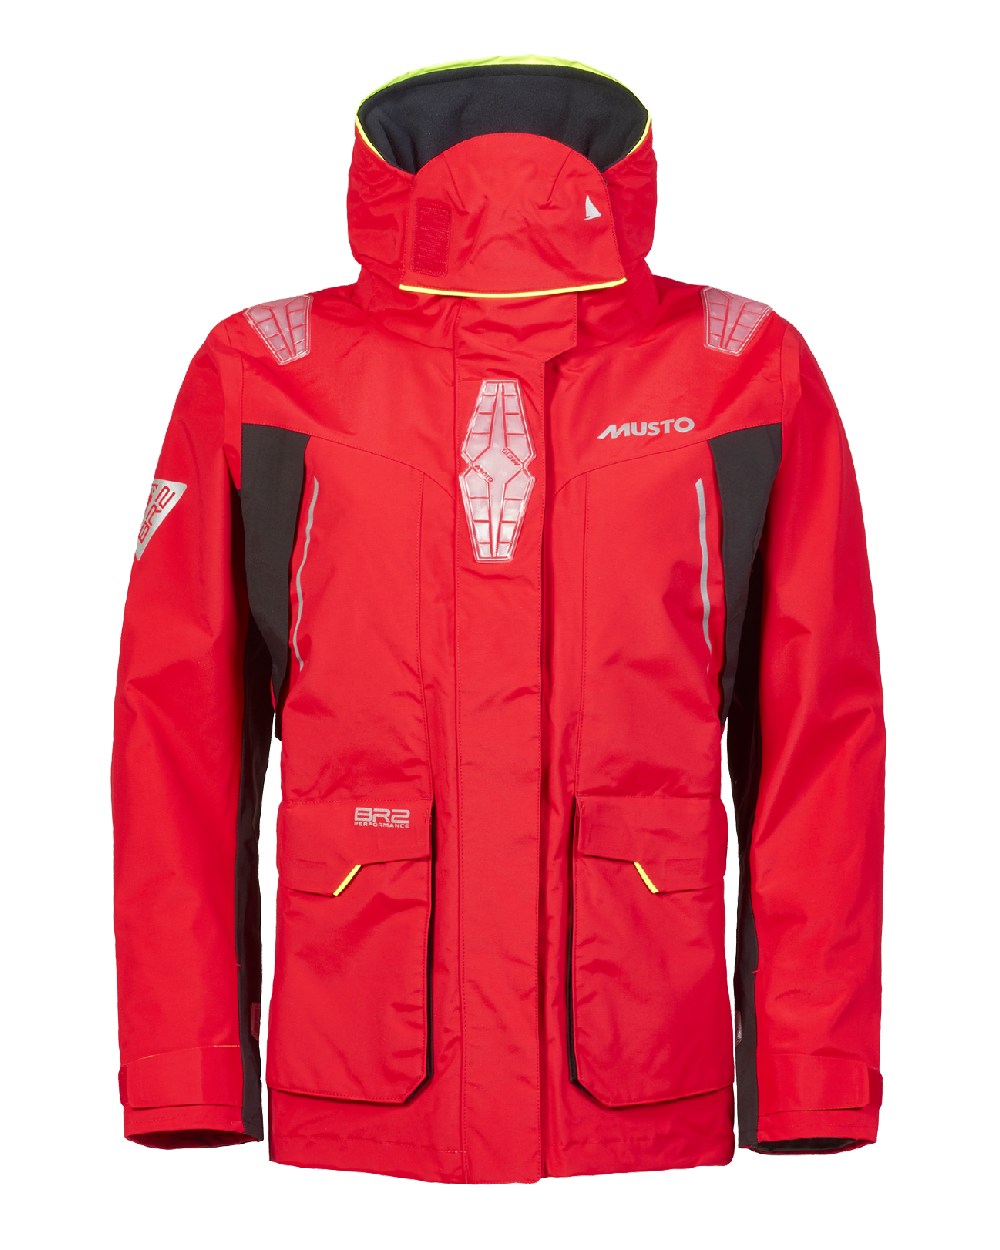 Musto Womens BR2 Offshore Jacket 2.0 in True Red 